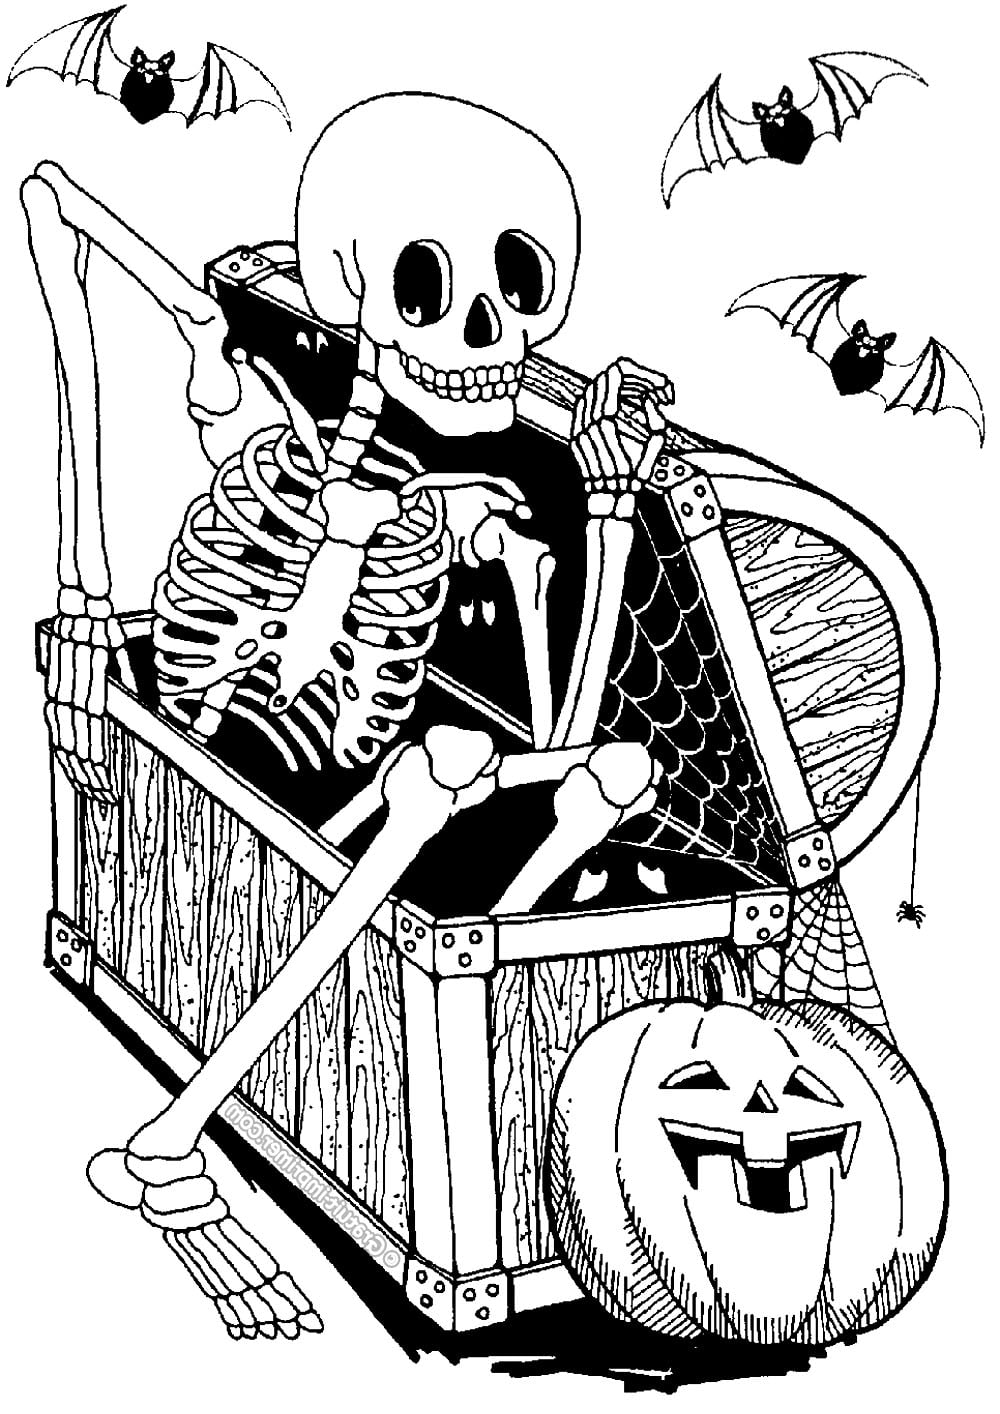 Printable Halloween Coloring Pages For Adults   POPSUGAR Smart ...